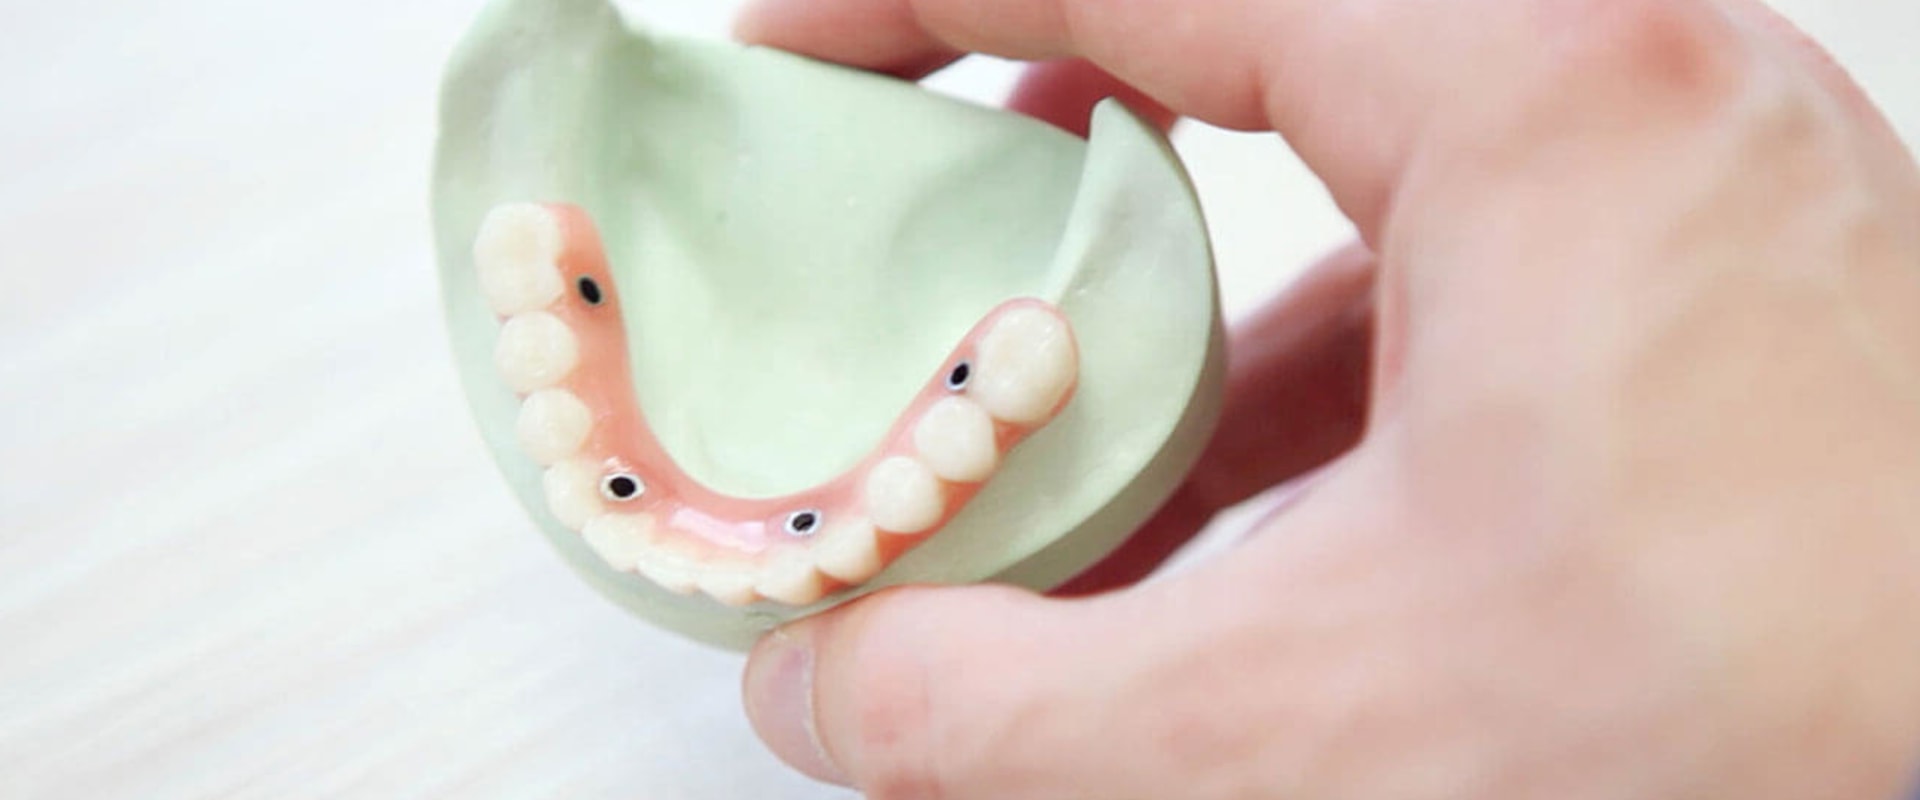 Increased stability and chewing ability: The Benefits of Implant Supported Dentures